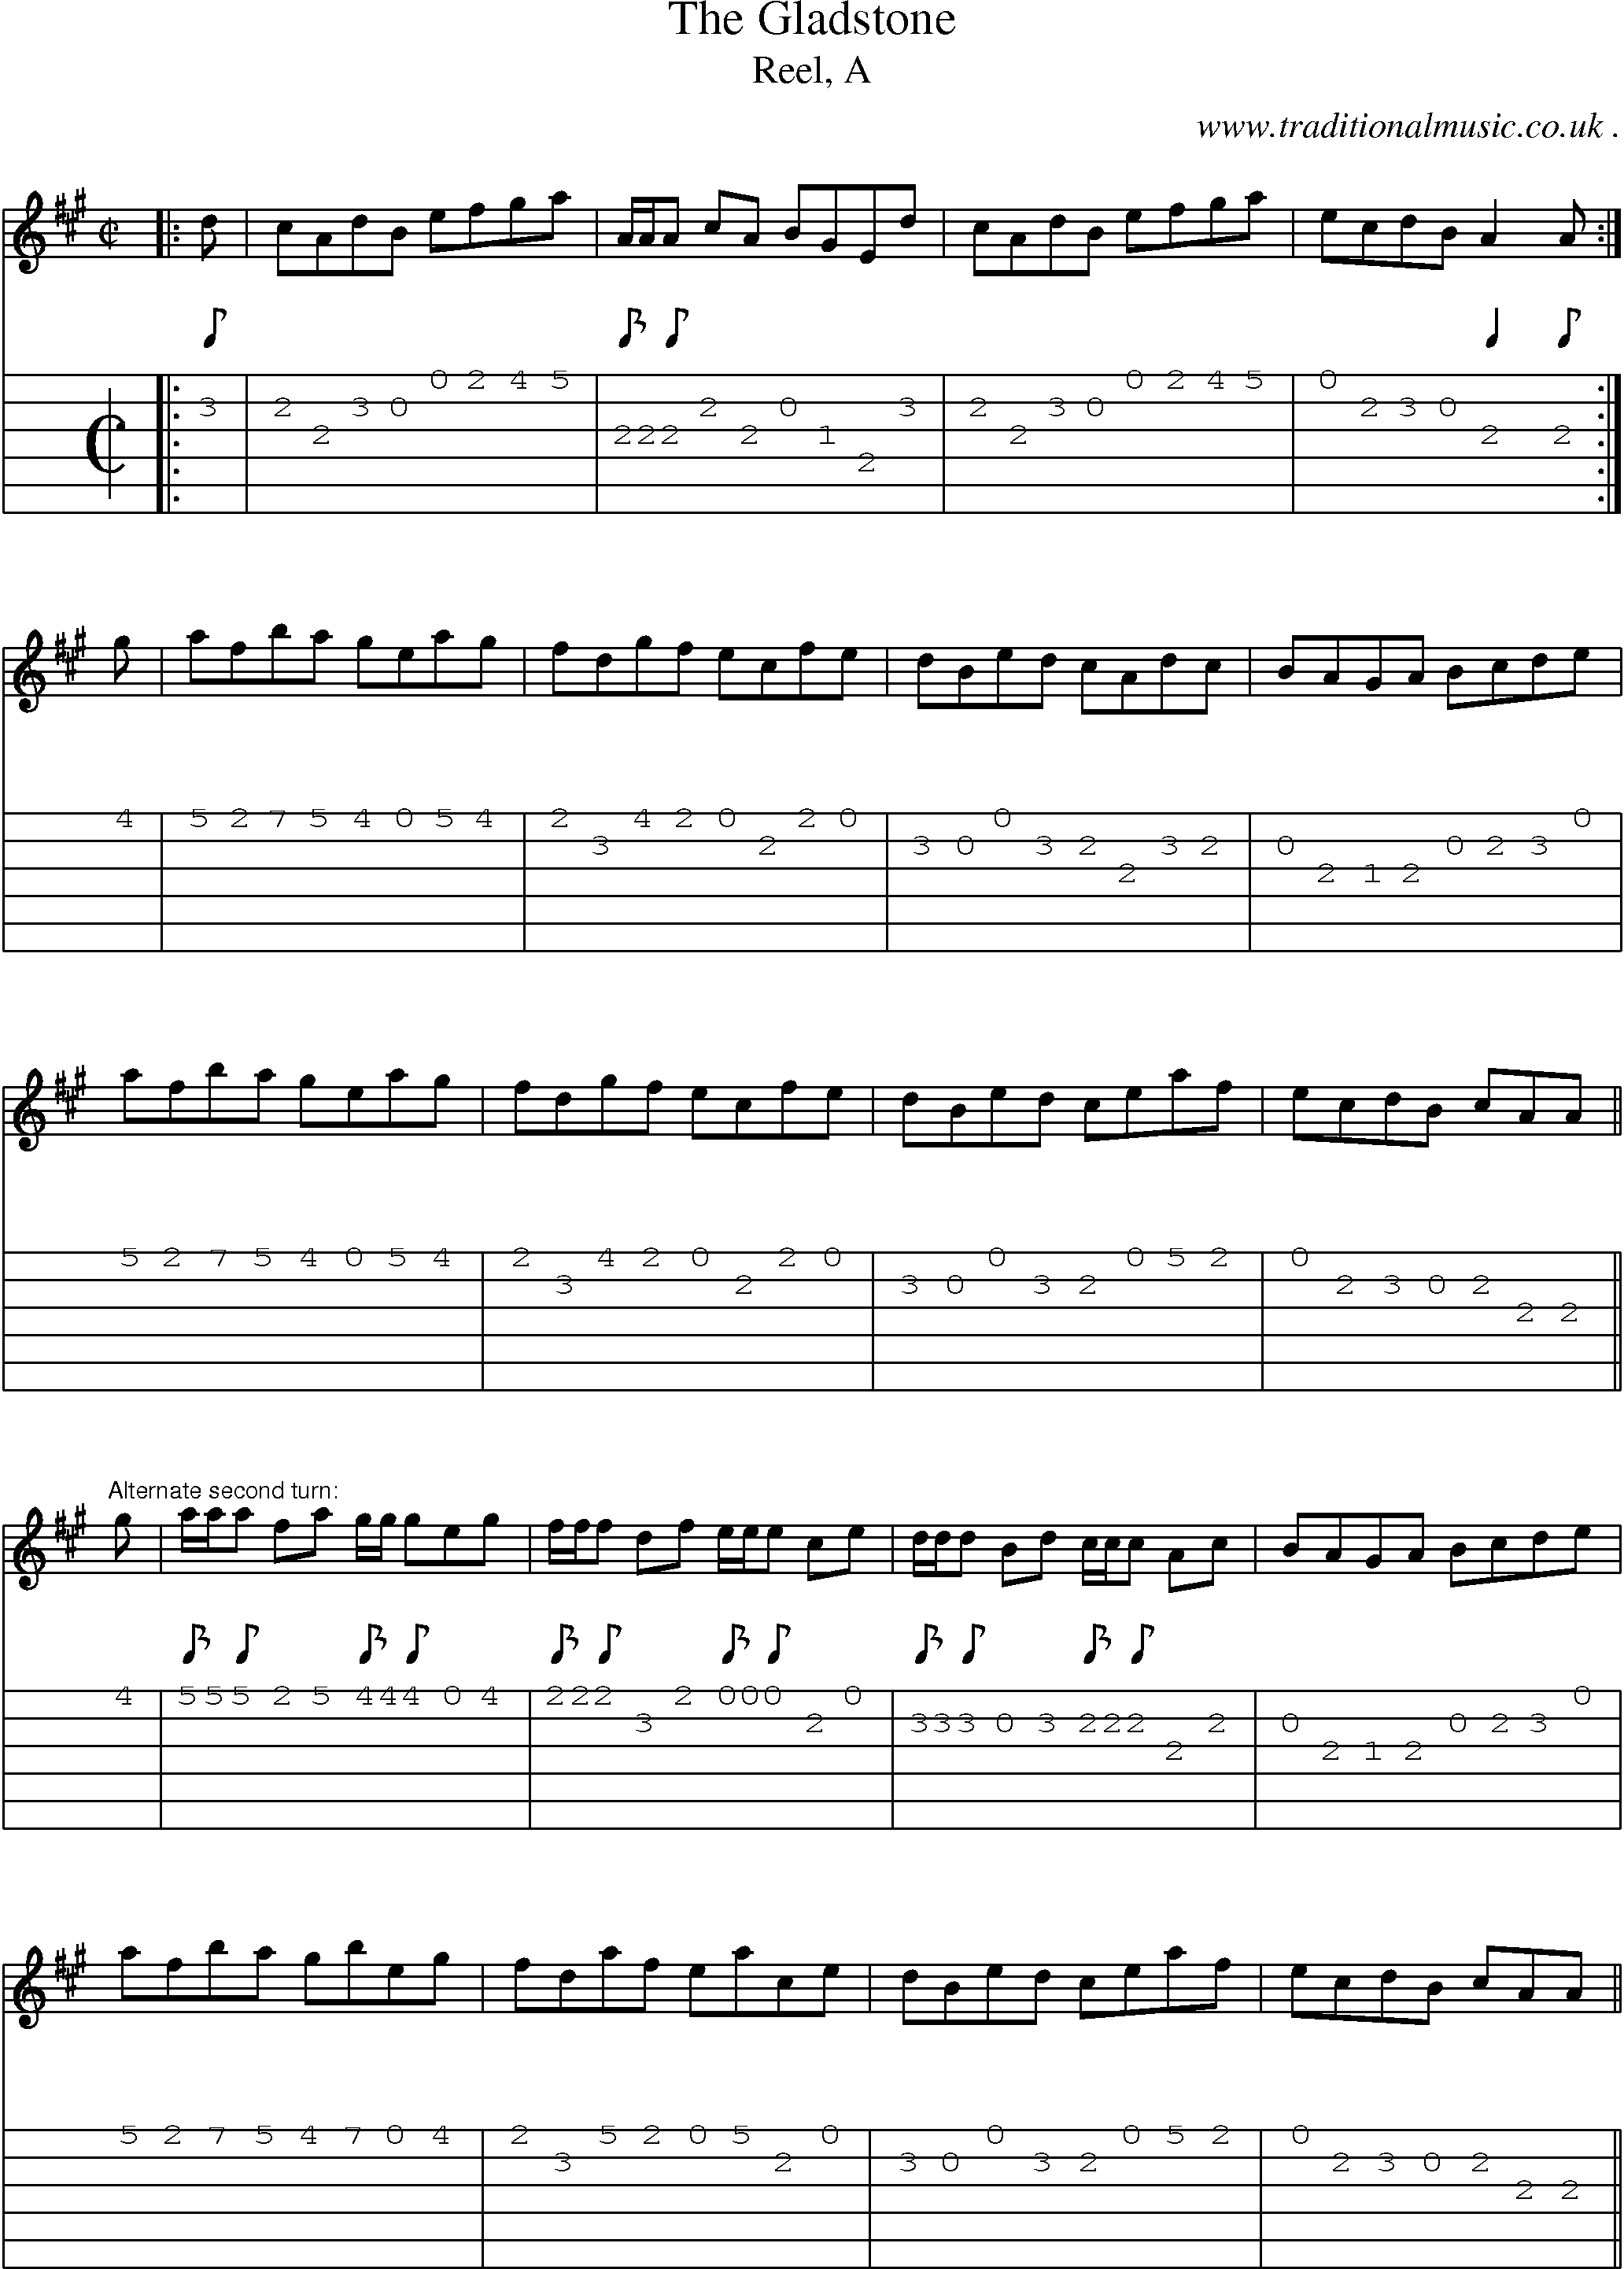 Sheet-music  score, Chords and Guitar Tabs for The Gladstone